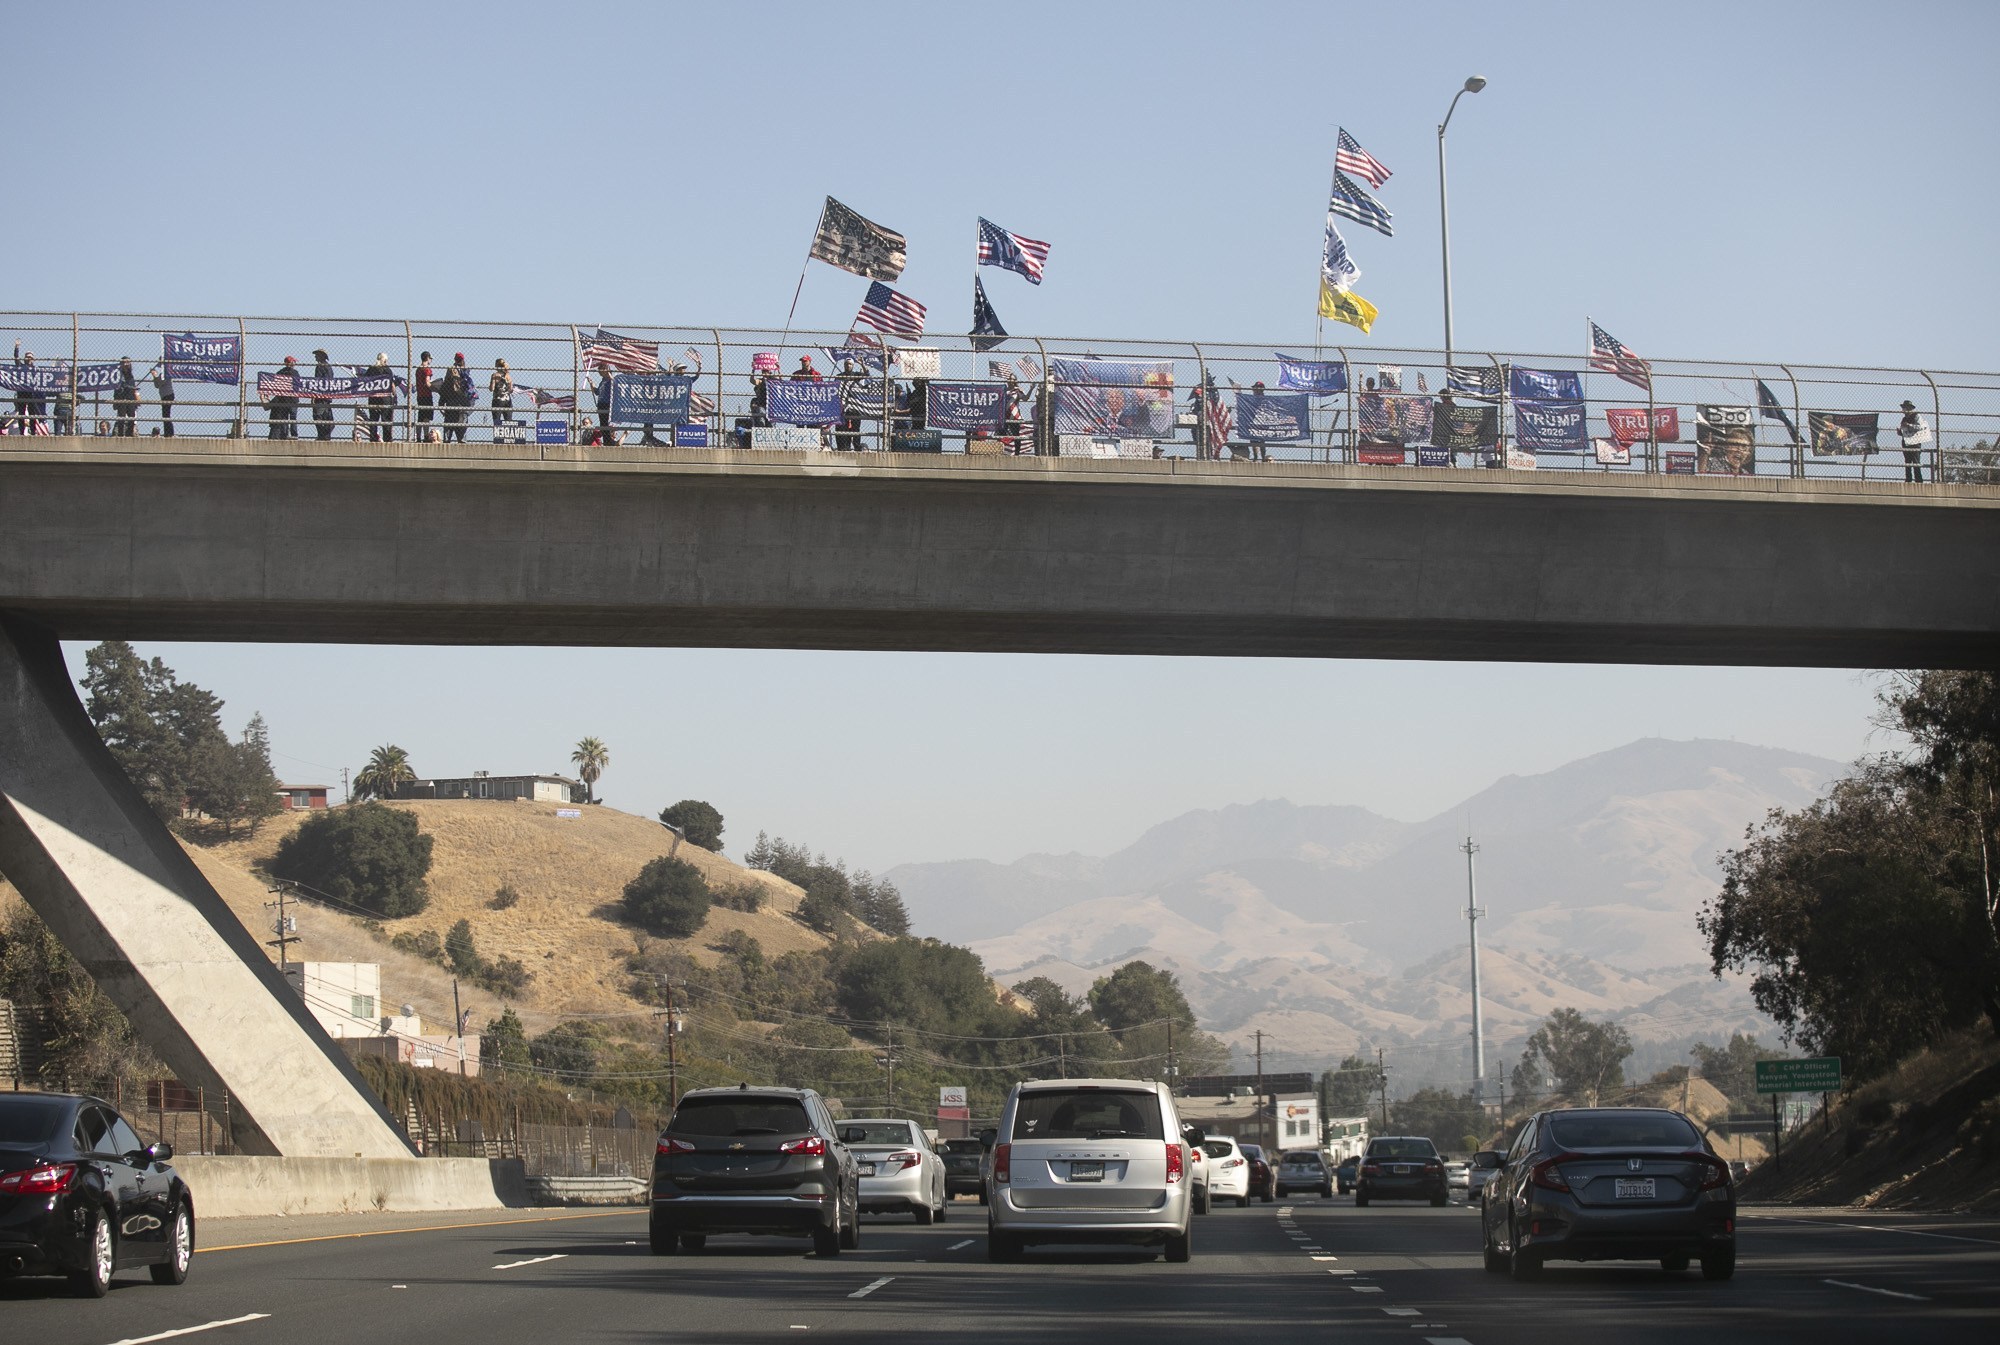 A group of people stand on a highway overpass holding flags and signs in support of a political rally. Several American flags and banners are displayed. Cars are visible on the highway below, and mountains can be seen in the background under a clear sky. A Berkeley Journalism project captures this moment.